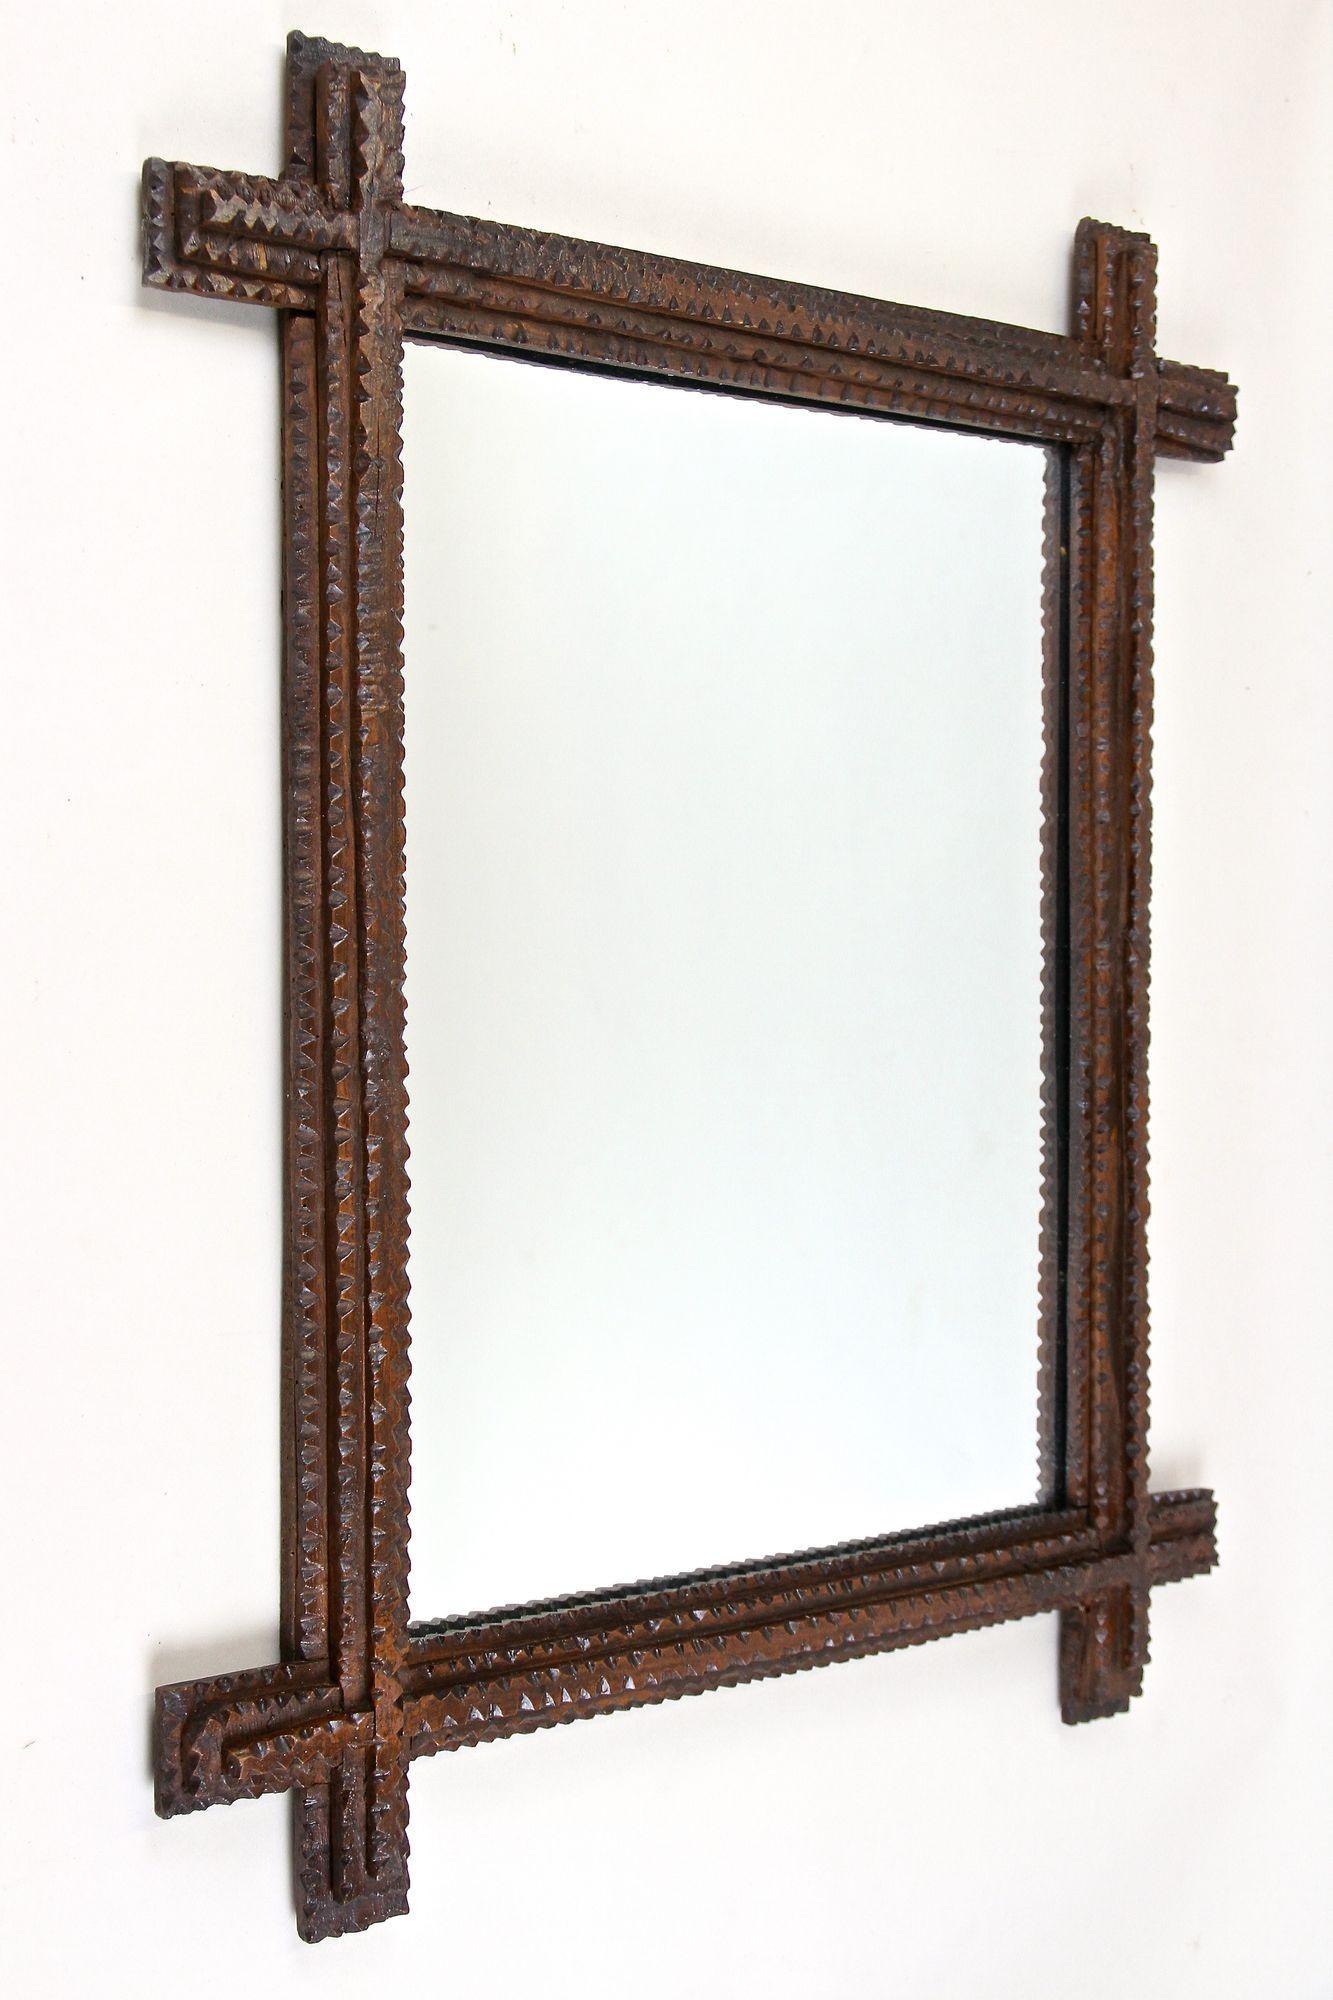 Beautiful rustic Tramp Art mirror from the 19th century in Austria. This unique rural wall mirror from around 1860 convinces by its great looking, unusual handcrafted design. The extraordinary chip carved frame confers this older example of a Tramp